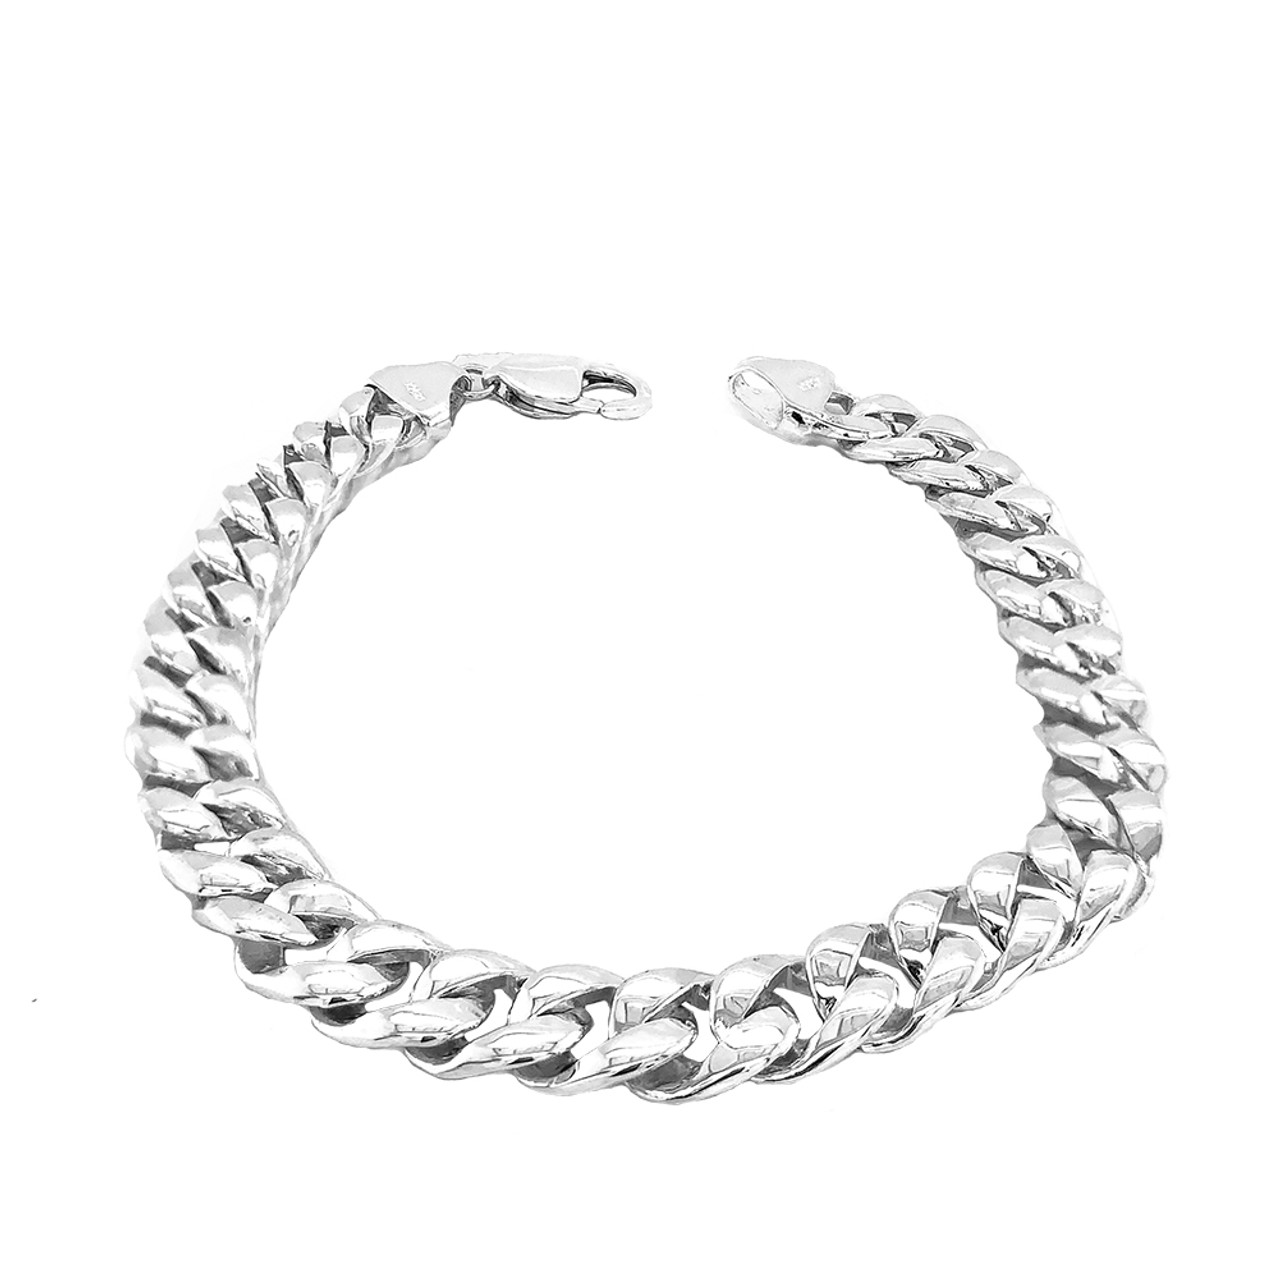 Real Solid 925 Sterling Silver Flat Curb Cuban Link Bracelet 3-10mm ITALY  MADE.